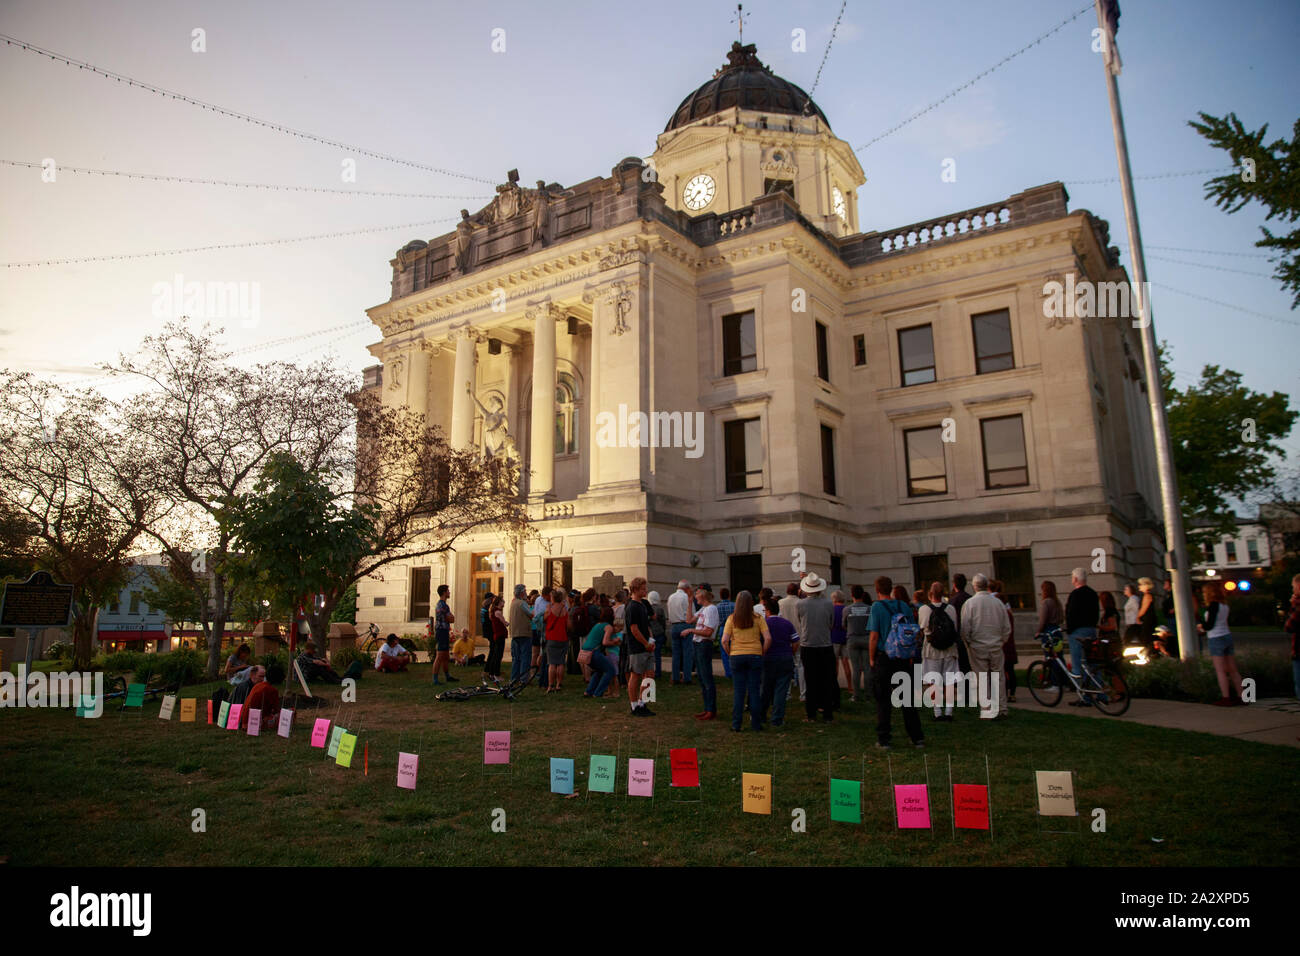 Signs for residents of Monroe County who died while experiencing homelessness line the courthouse lawn during the Homeless Memorial Vigil, Thursday, October 3, 2019 at the Monroe County Courthouse in Bloomington, Ind. During the vigil the names of community members who died while experiencing homelessness were read, and their names were placed in memorial. The names read are, Shelly Arthur, Craig Bowles, Billy Brown, Steven Brown, Bruce Bundy, Greg Cook, Alvin Davis, Taffany Ducharme, Coy Fulford, April Hattery, Doug James, Lewis Jordan, Eric Pelley, John McKinney, Margaret Miao-Kong, Teohna M Stock Photo